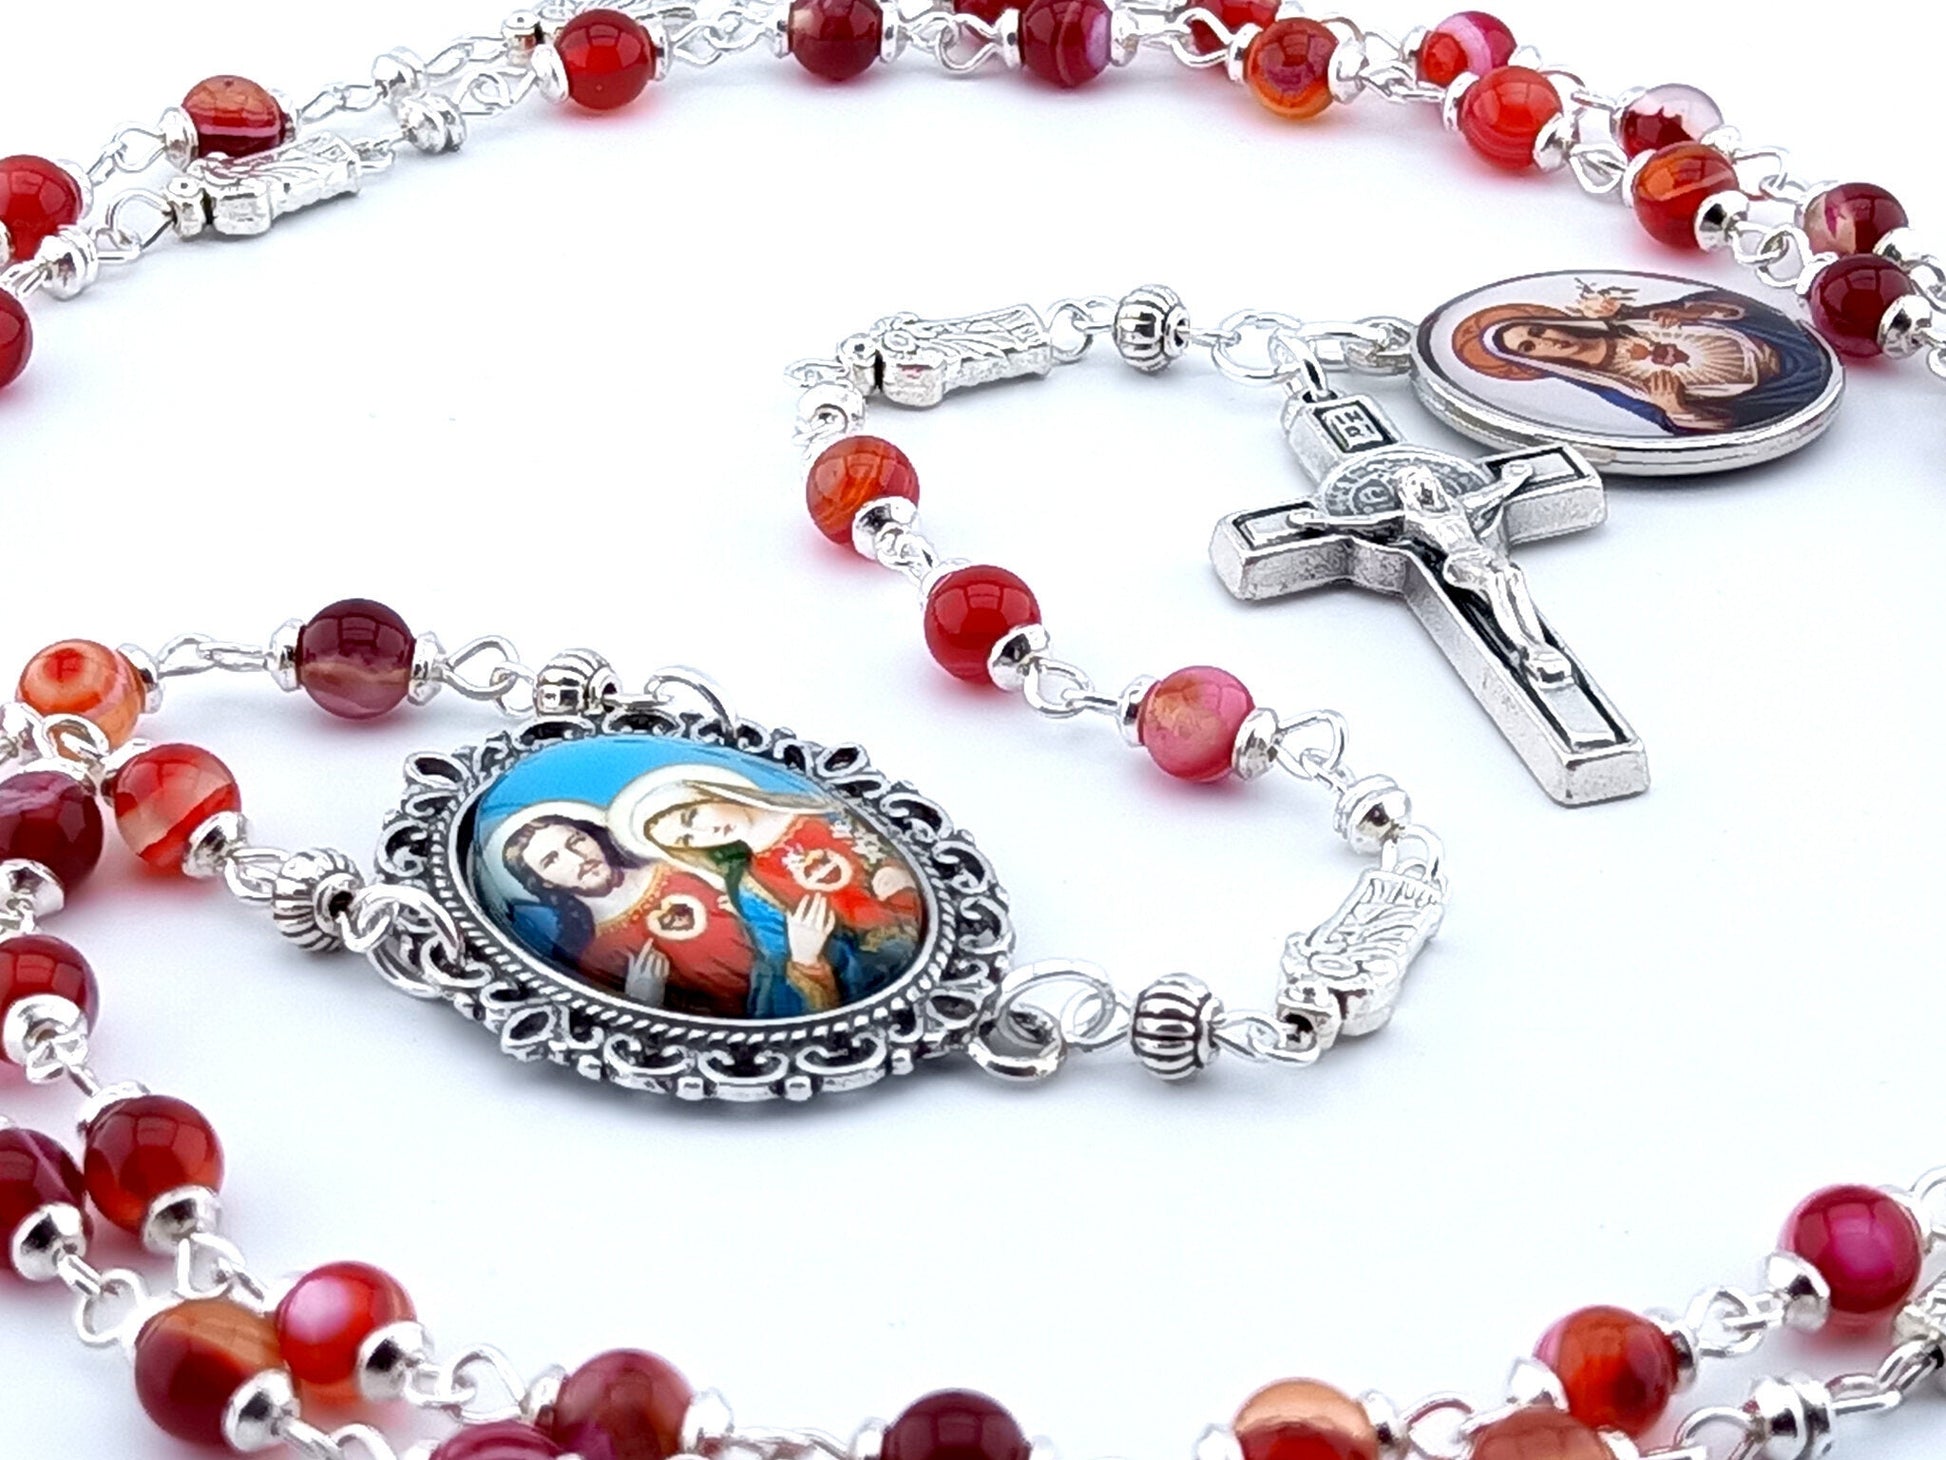 The two Hearts of Jesus and Mary unique rosary beads with red agate gemstone beads, silver Saint Benedict crucifix, picture centre medal and pater beads.